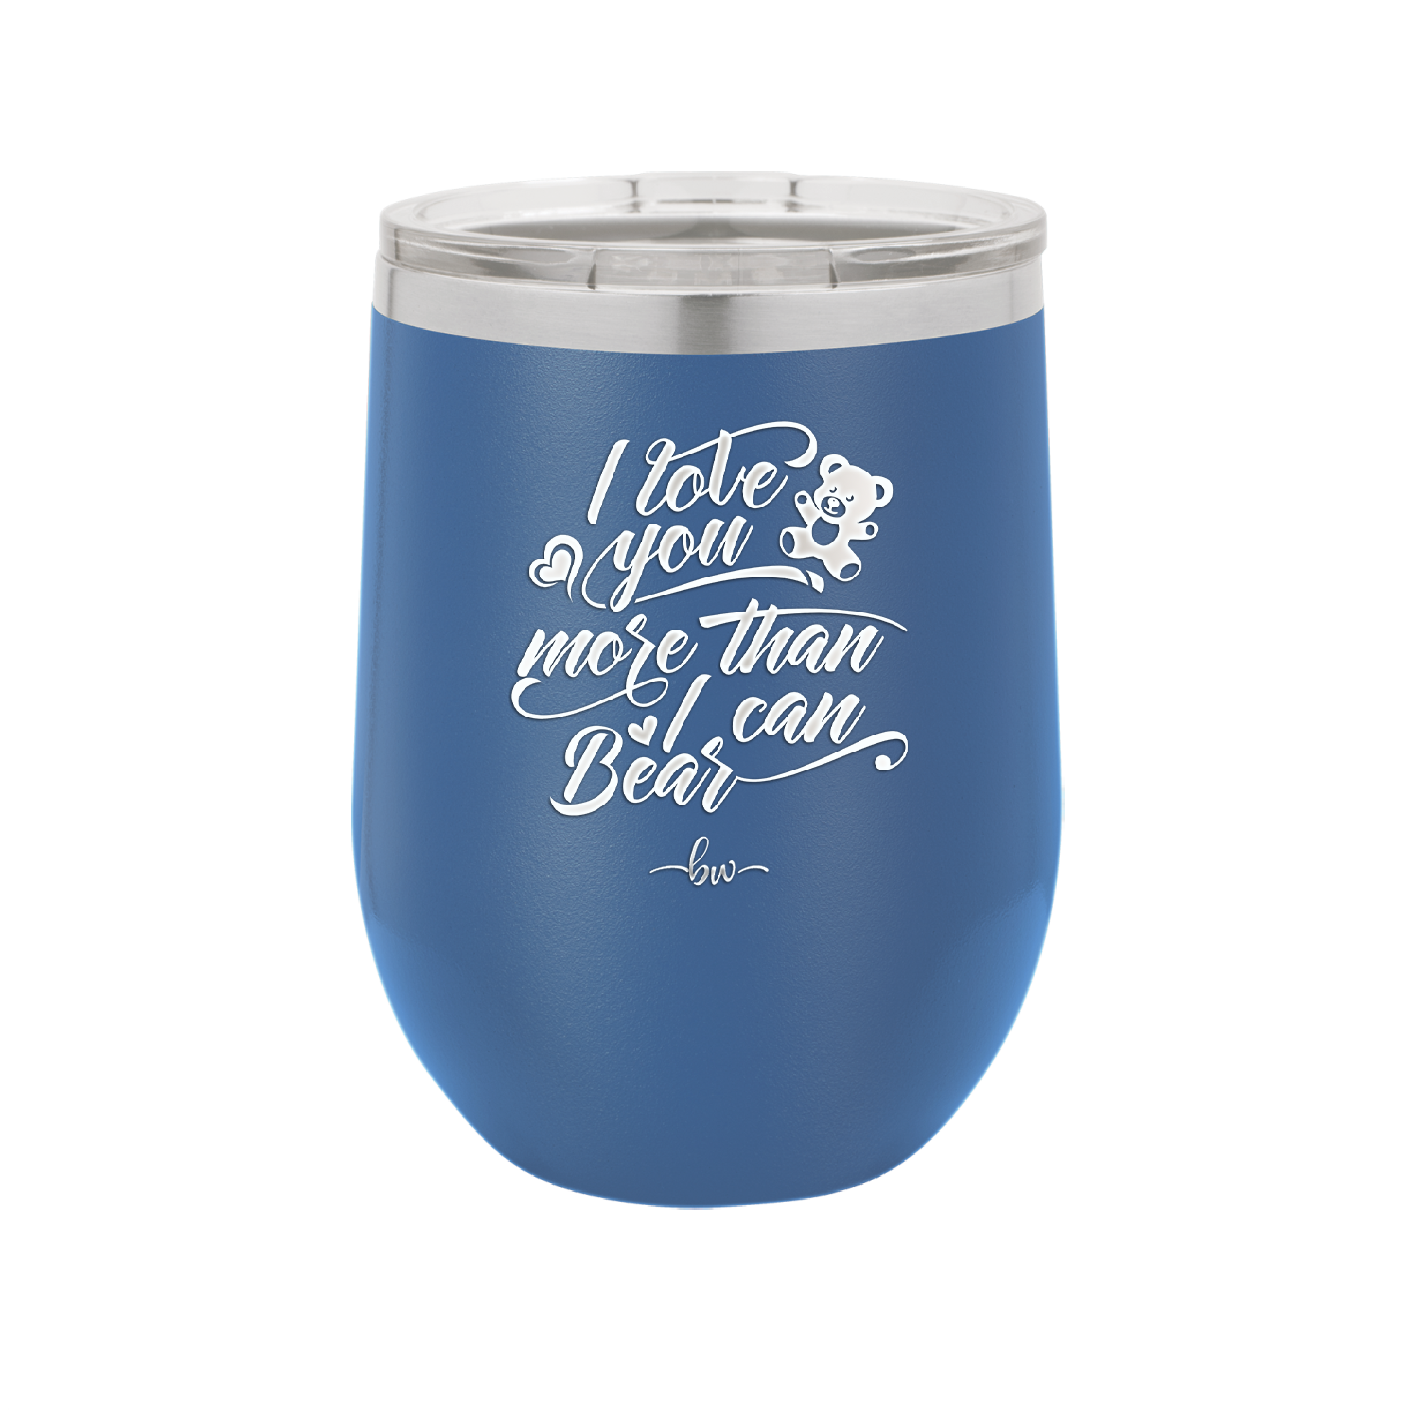 I Love You More than I Can Bear - Laser Engraved Stainless Steel Drinkware - 1716 -